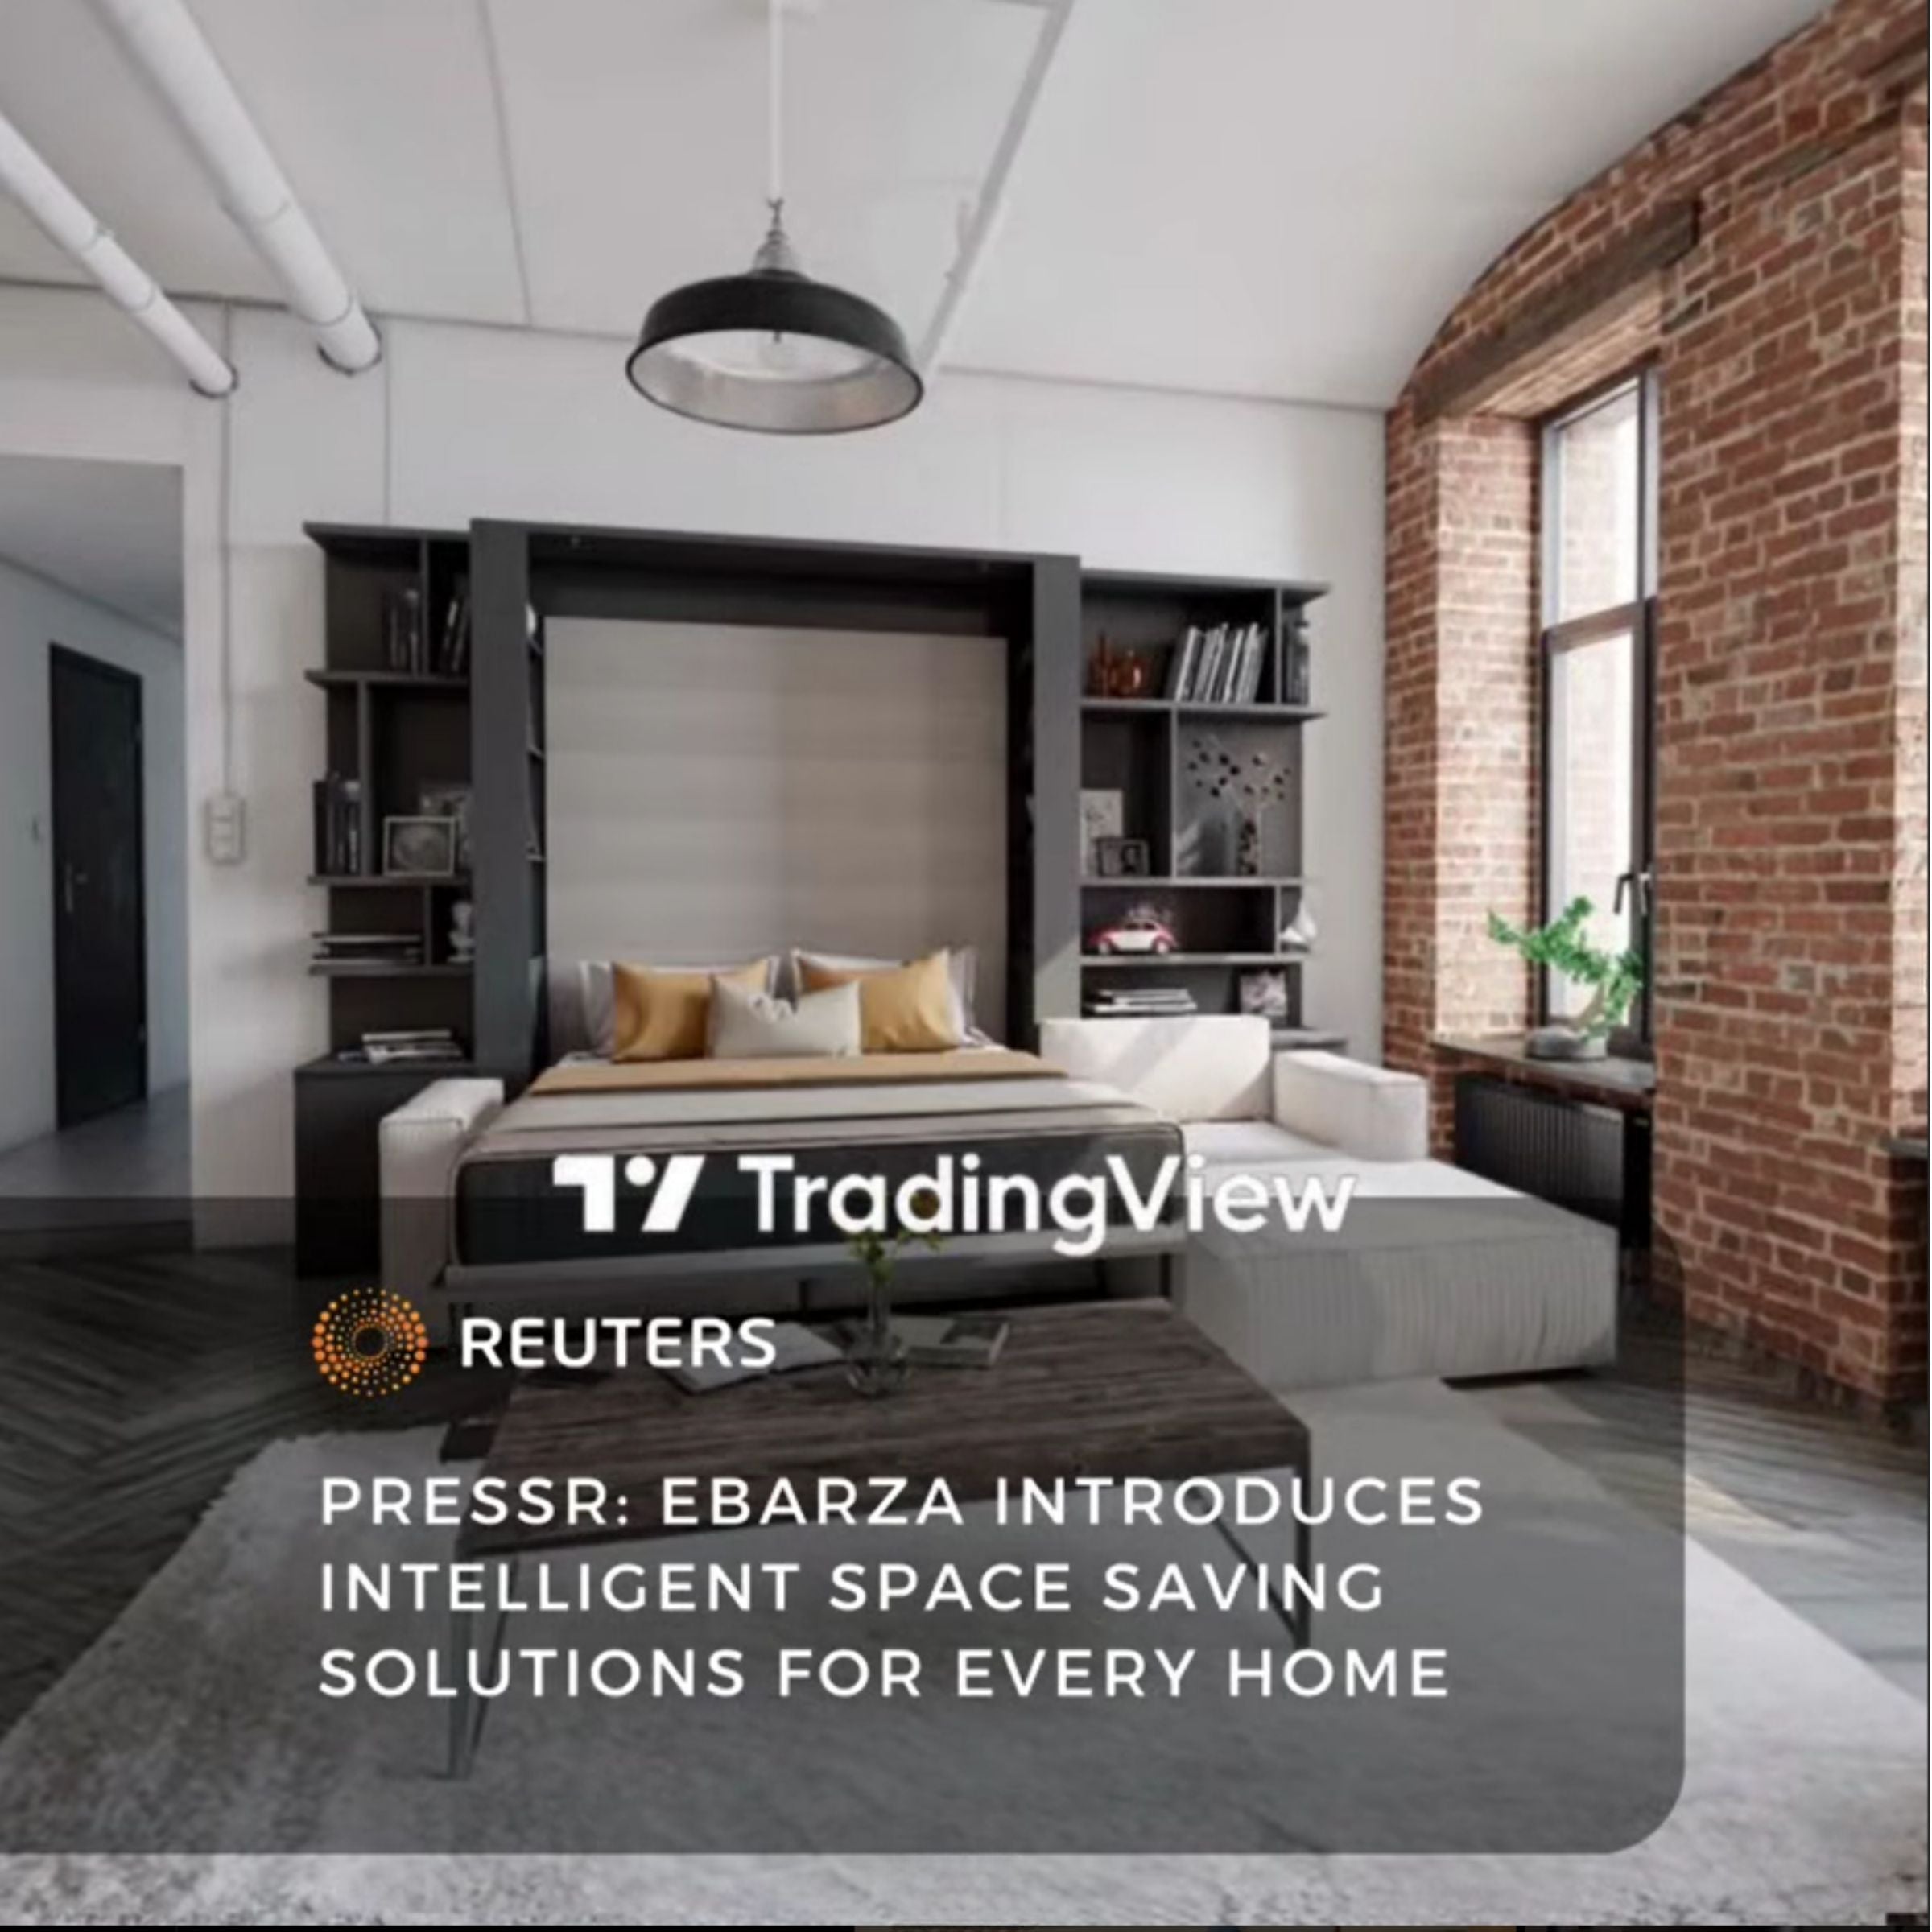 PRESSR: Ebarza introduces intelligent space saving solutions for every home